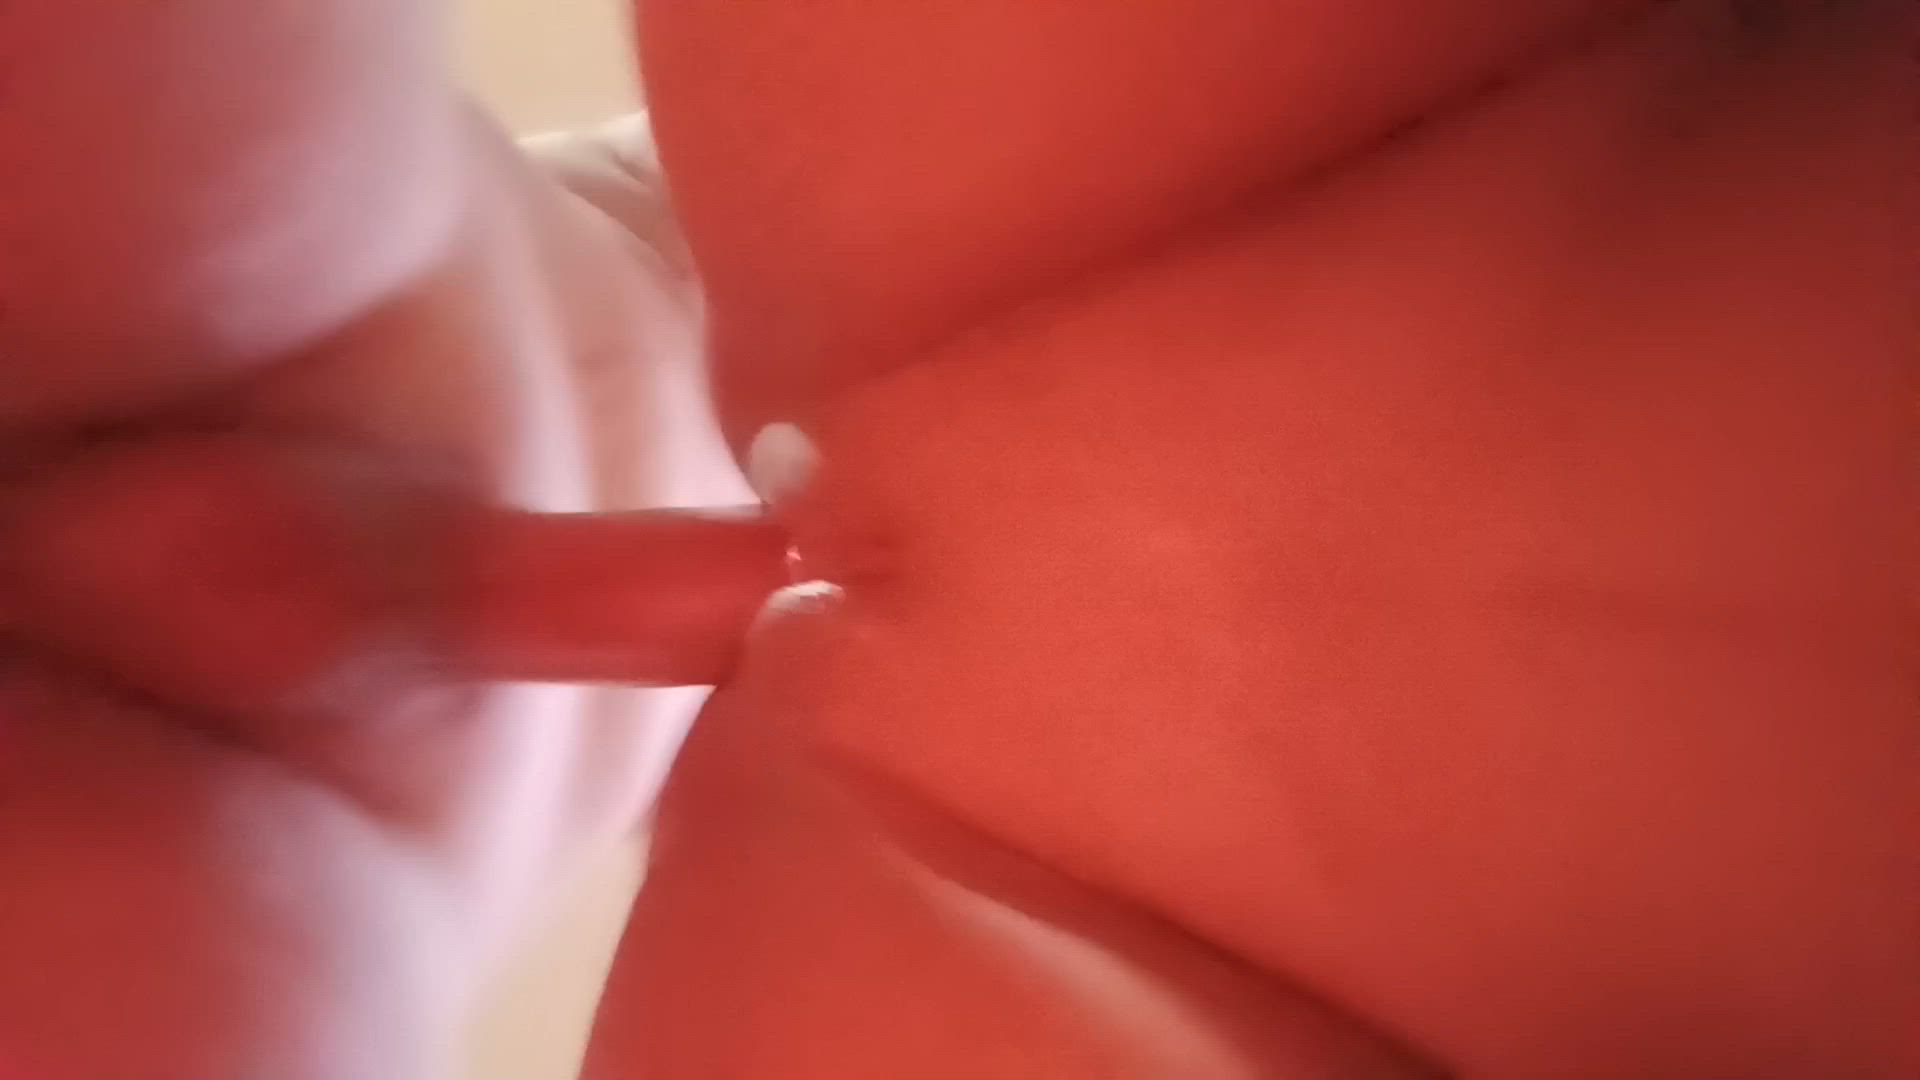 Ass porn video with onlyfans model Lexry <strong>@solstice33</strong>